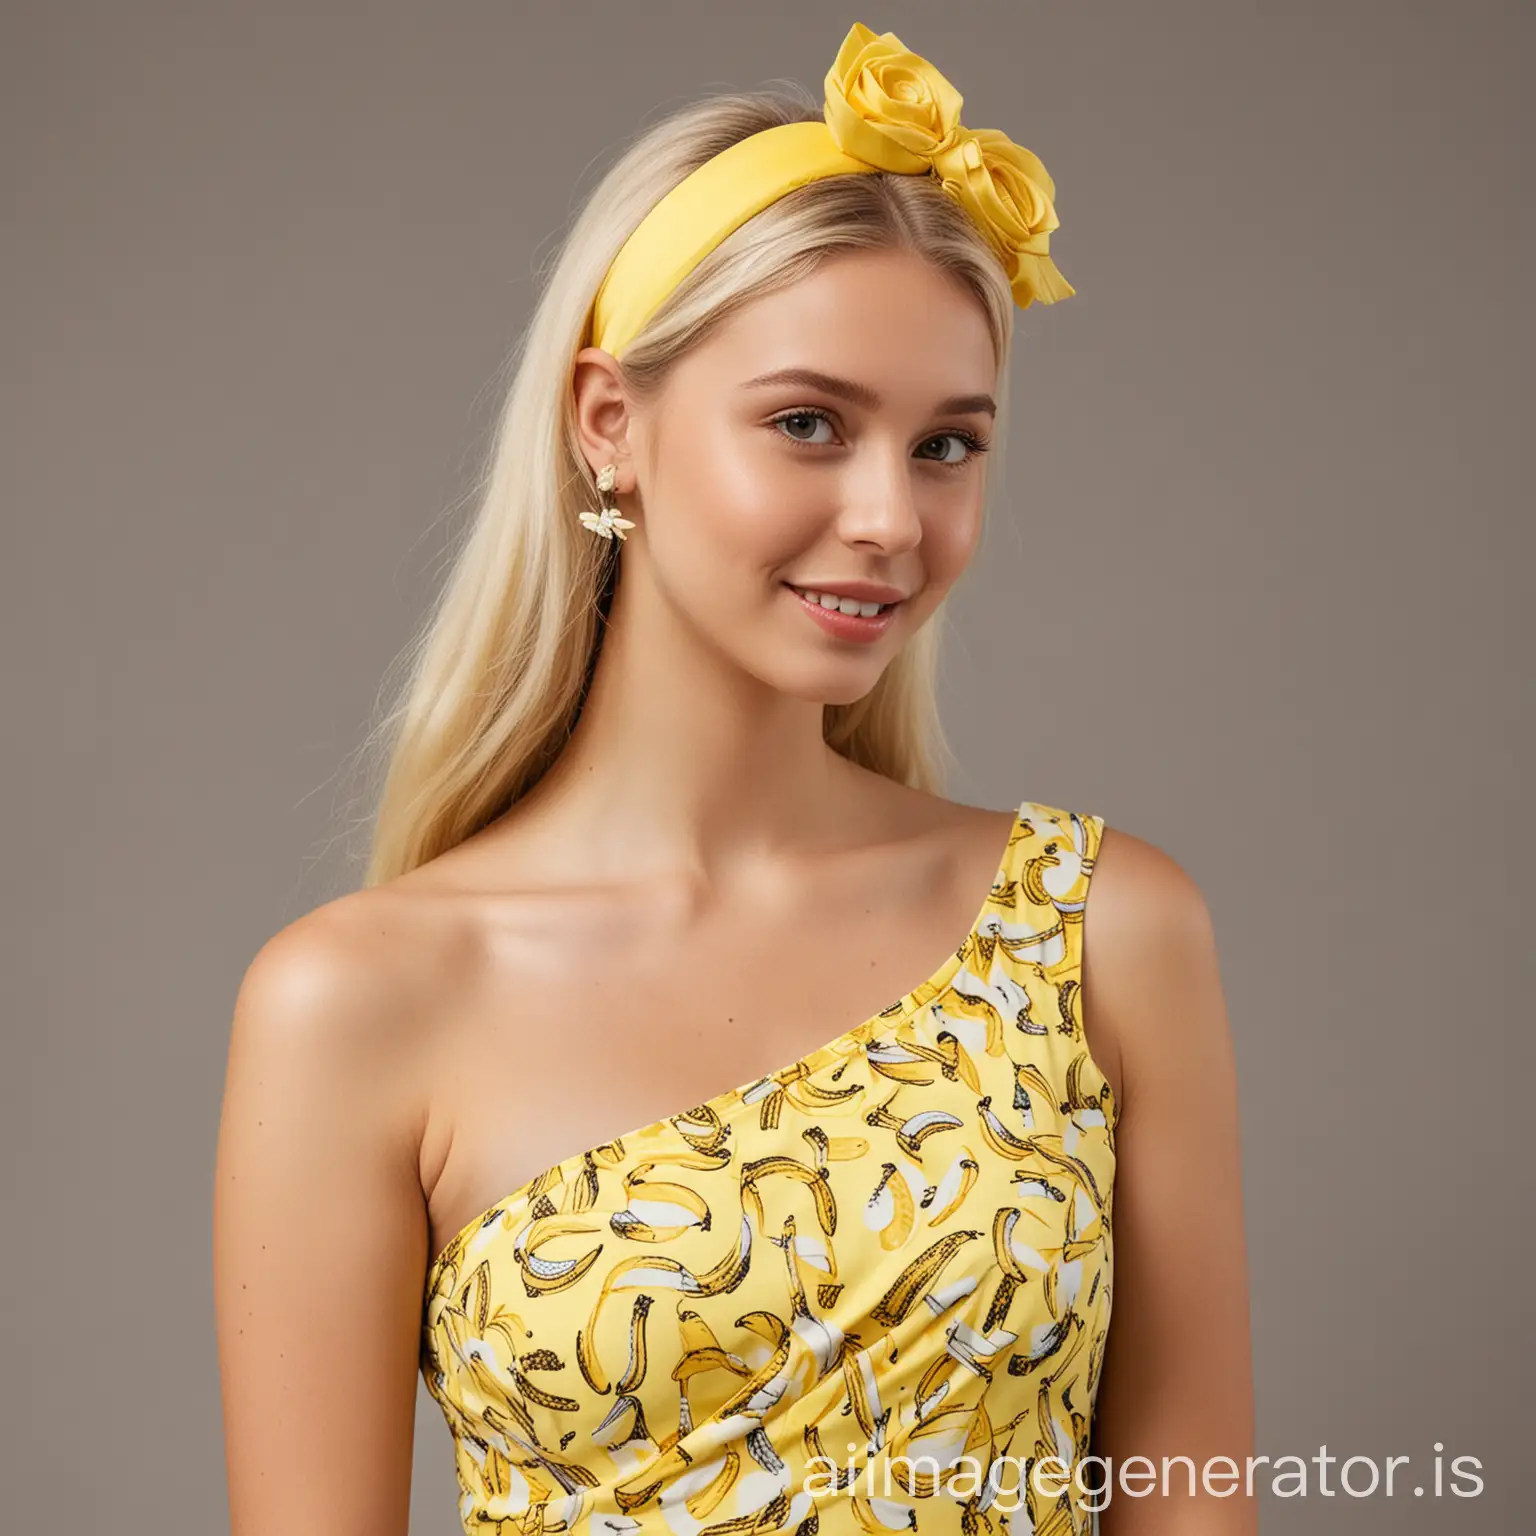 A beautiful blonde girl wearing a banana inspired one shoulder dress with hair accessories